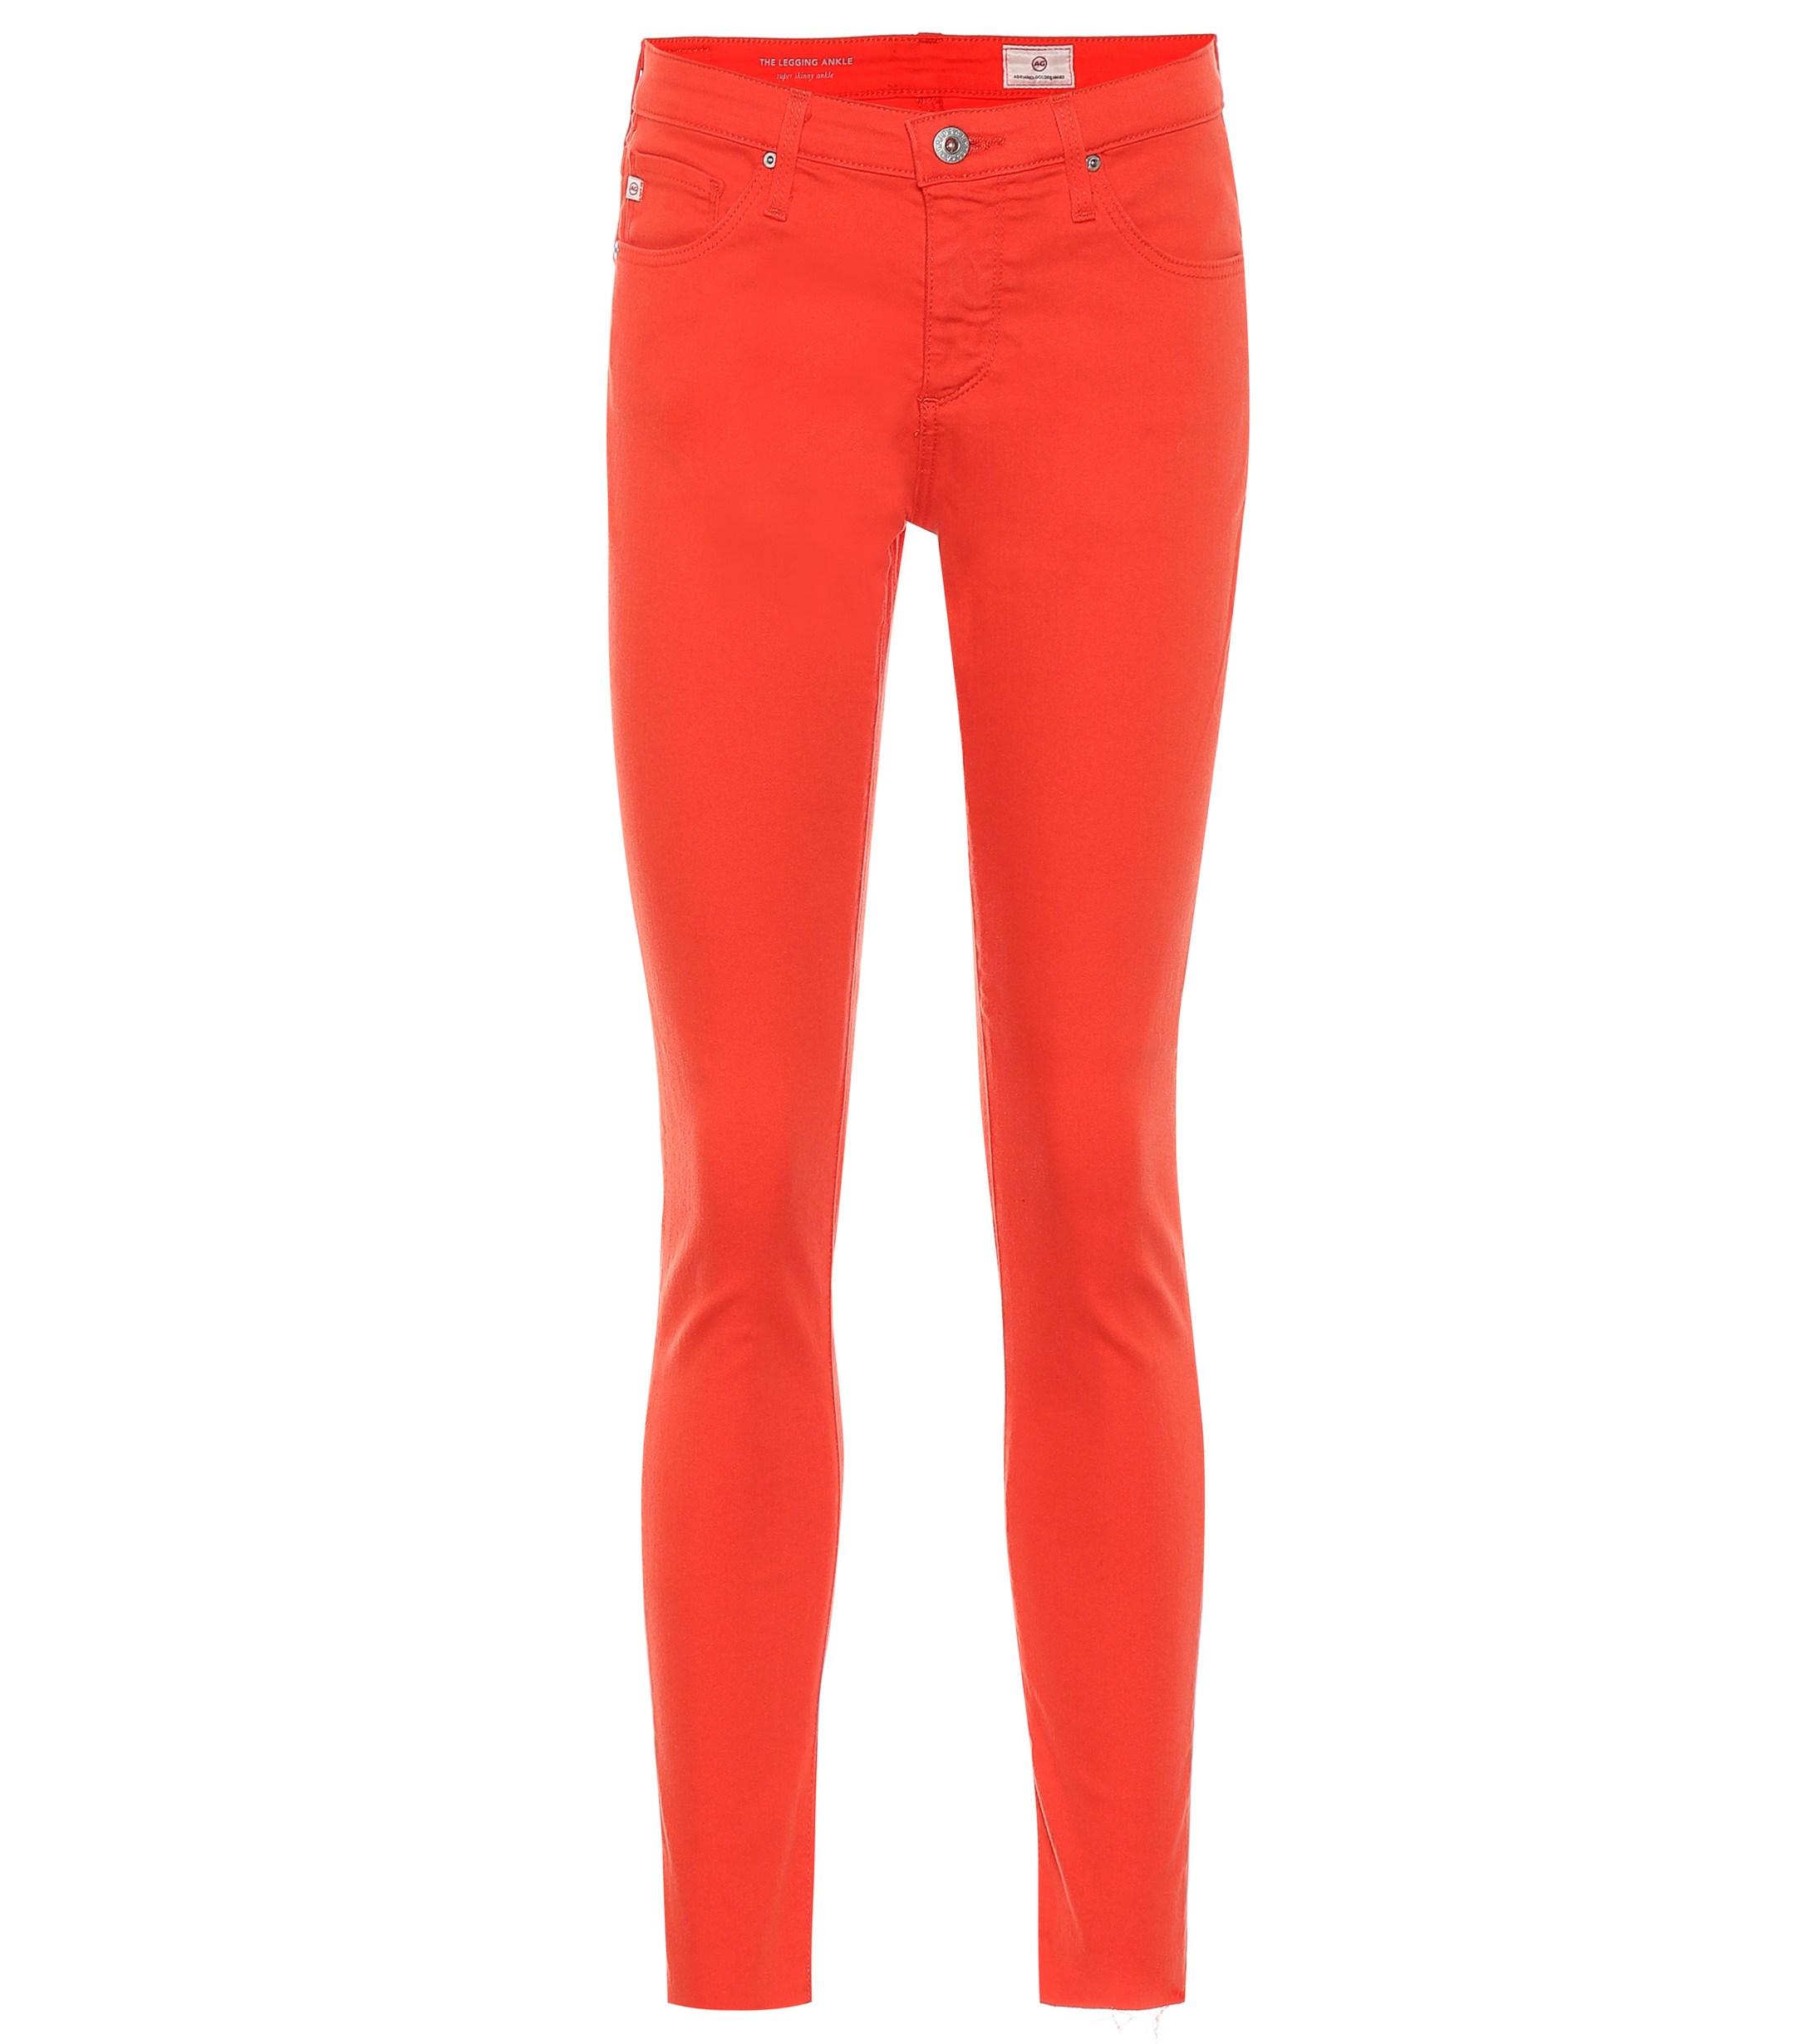 AG Jeans Denim The Legging Ankle Skinny Jeans in Red Poppy (Red) - Save ...